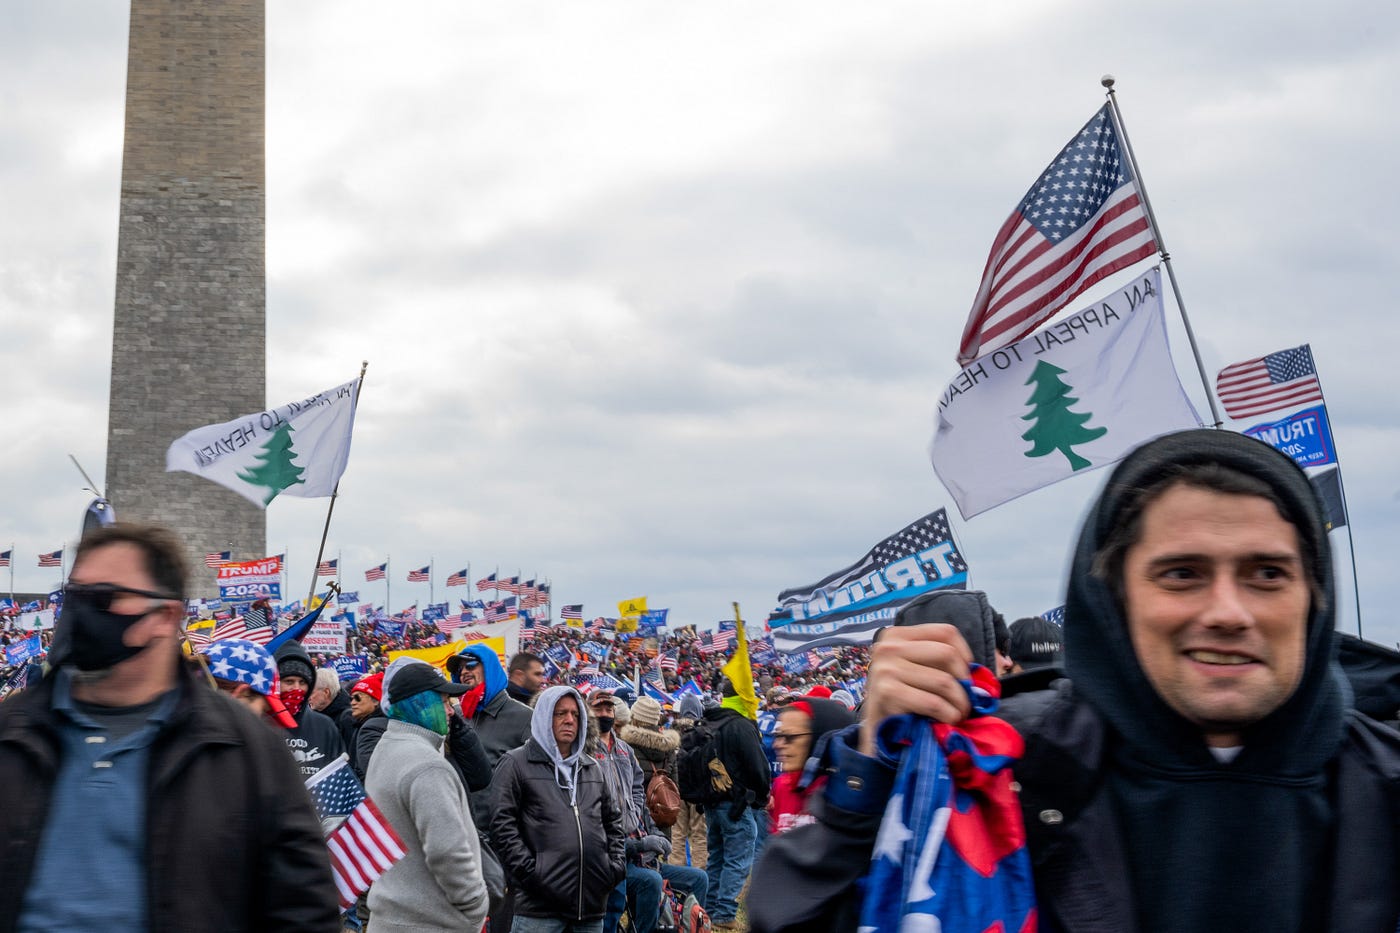 The flag: one symbol at the Capitol riot connects far-right extremism Christianity | by Tow Center | Medium